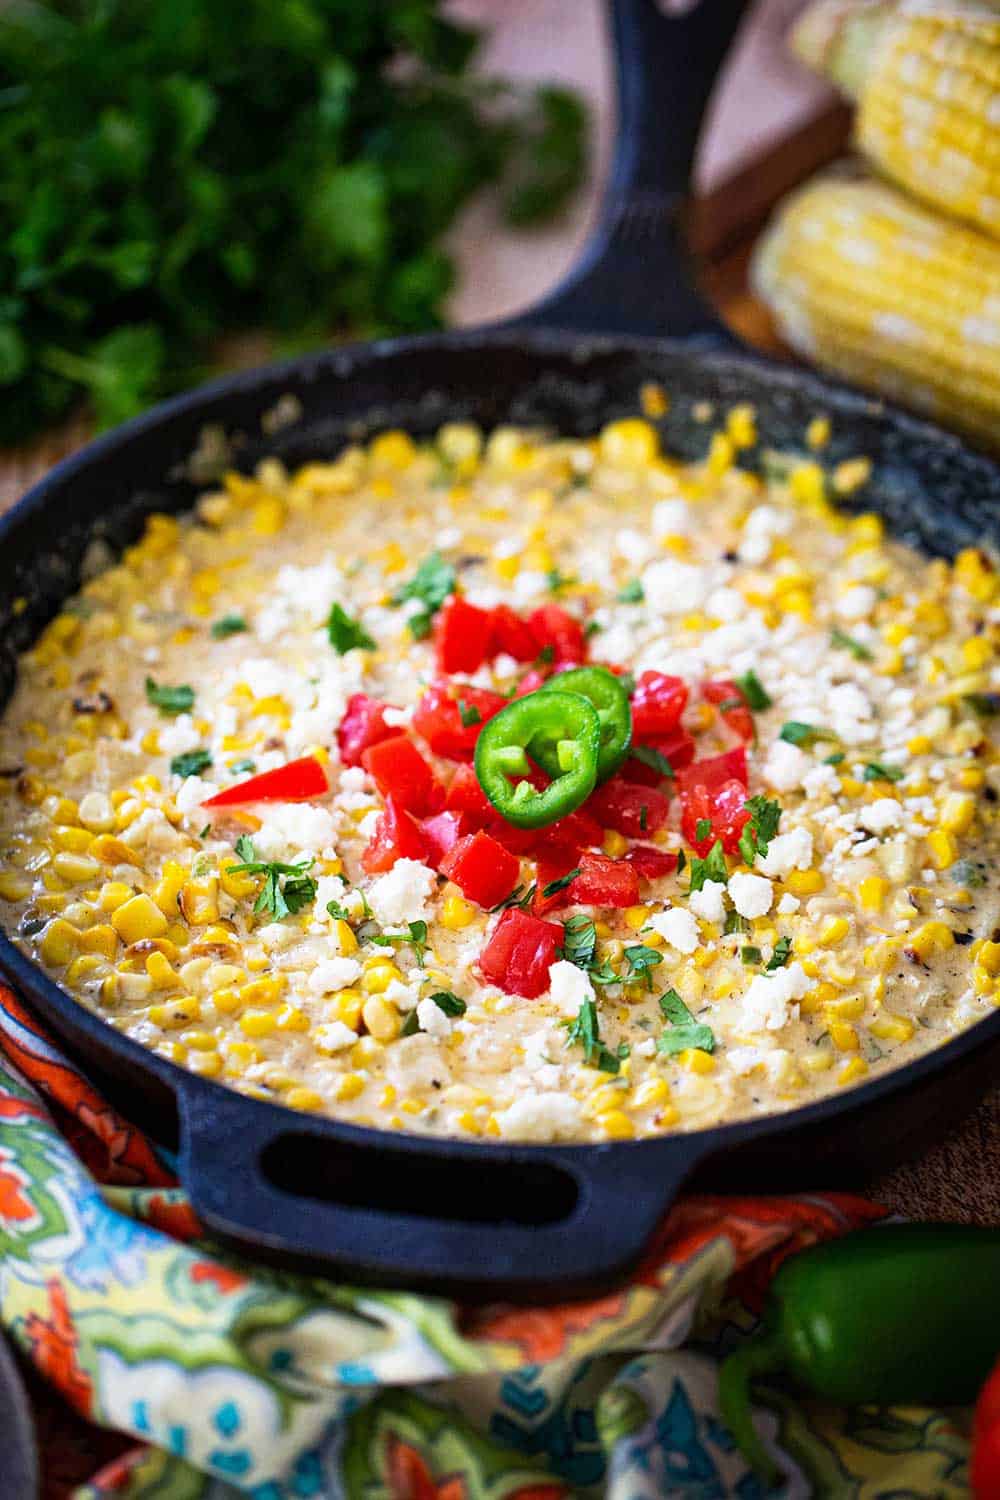 A cast-iron skillet filled with Mexican cream corn topped with crumbled queso fresco, chopped tomatoes, and chopped cilantro.